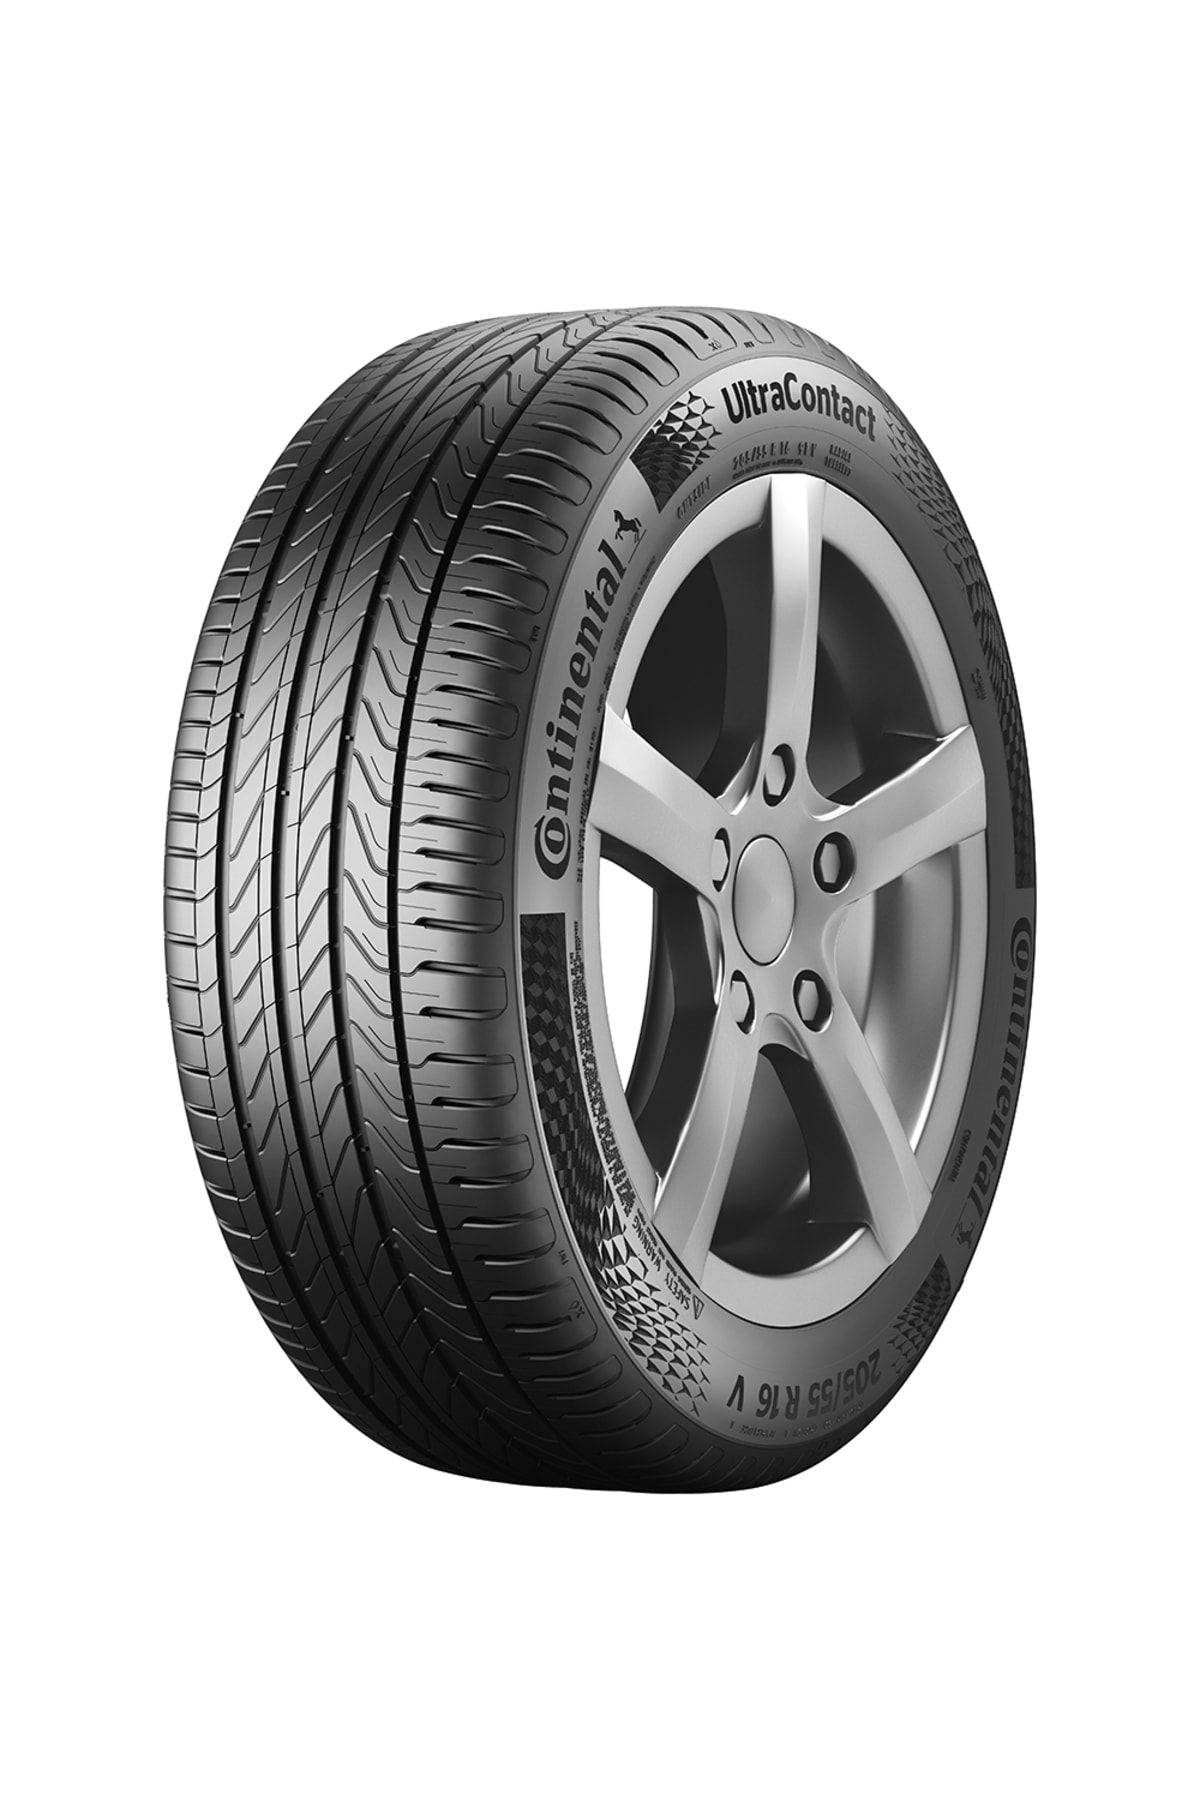 Continental 185/65r15 88t Ultracontact (yaz) (2023)